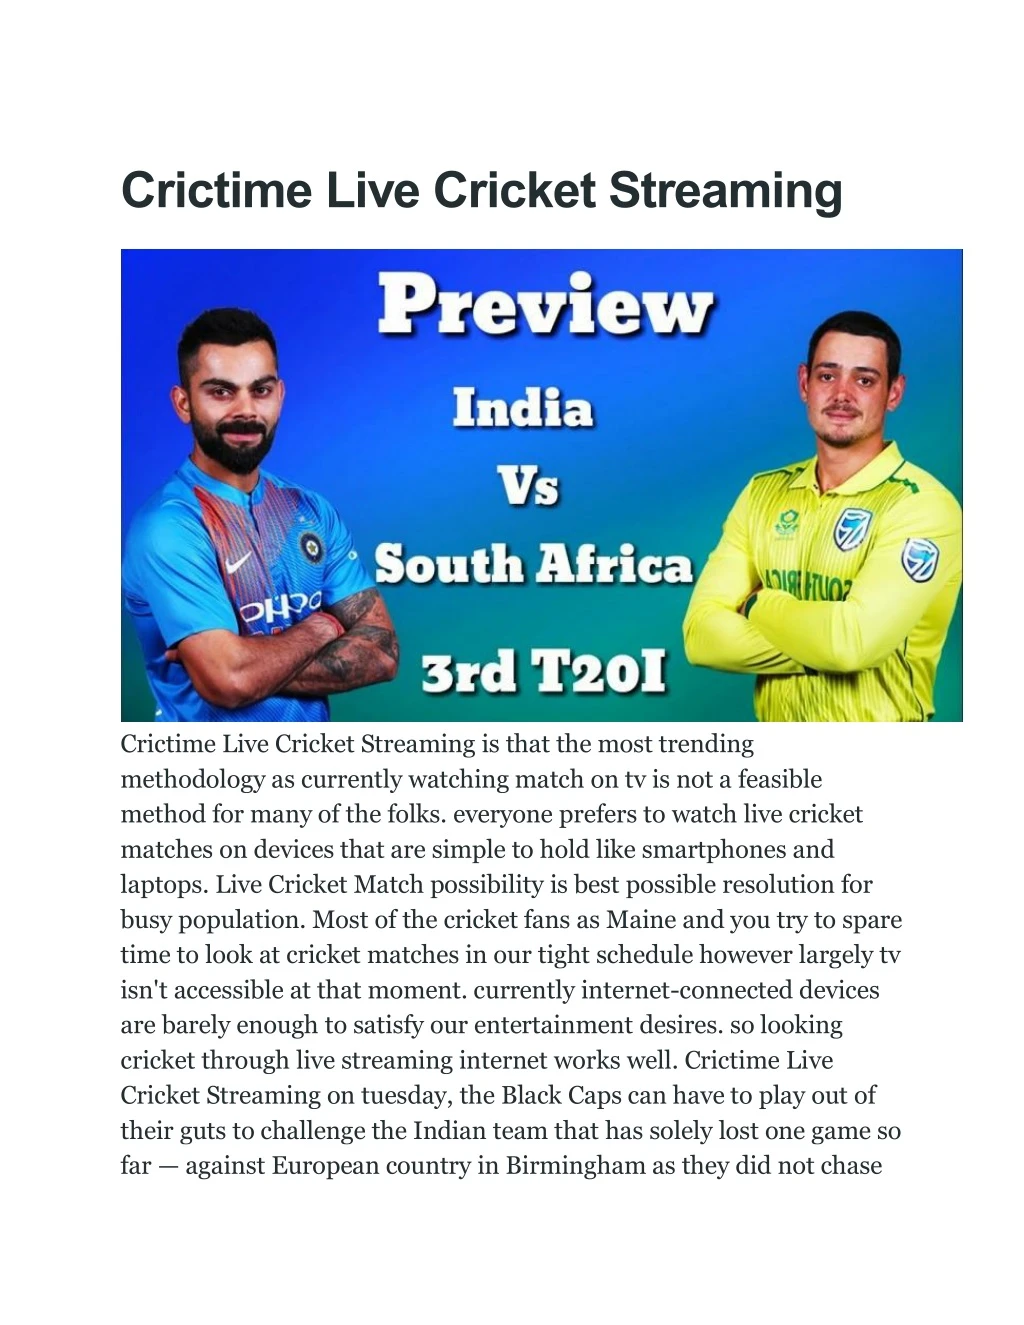 crictime live cricket streaming